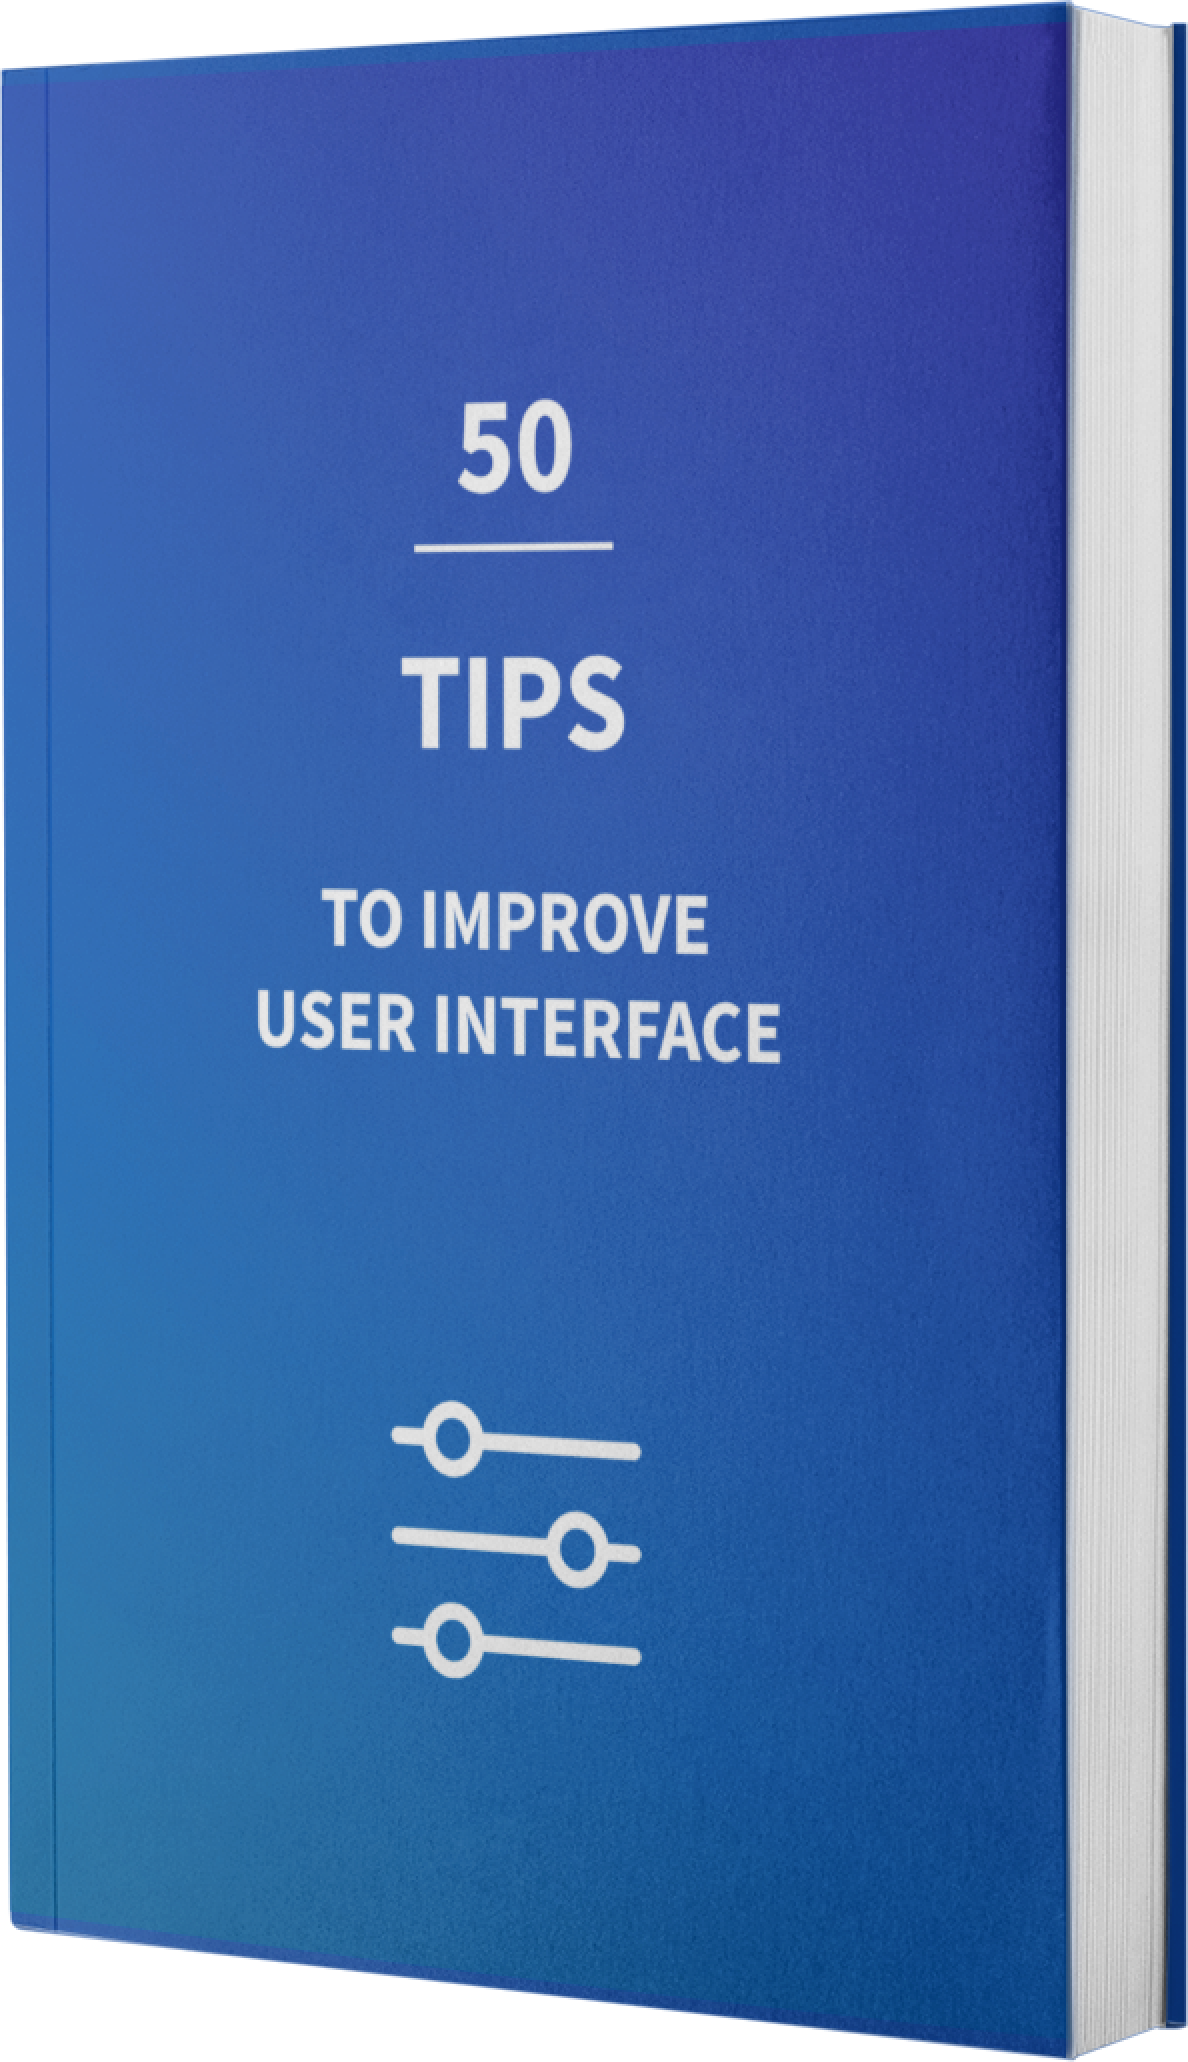 Fifty UI tips book